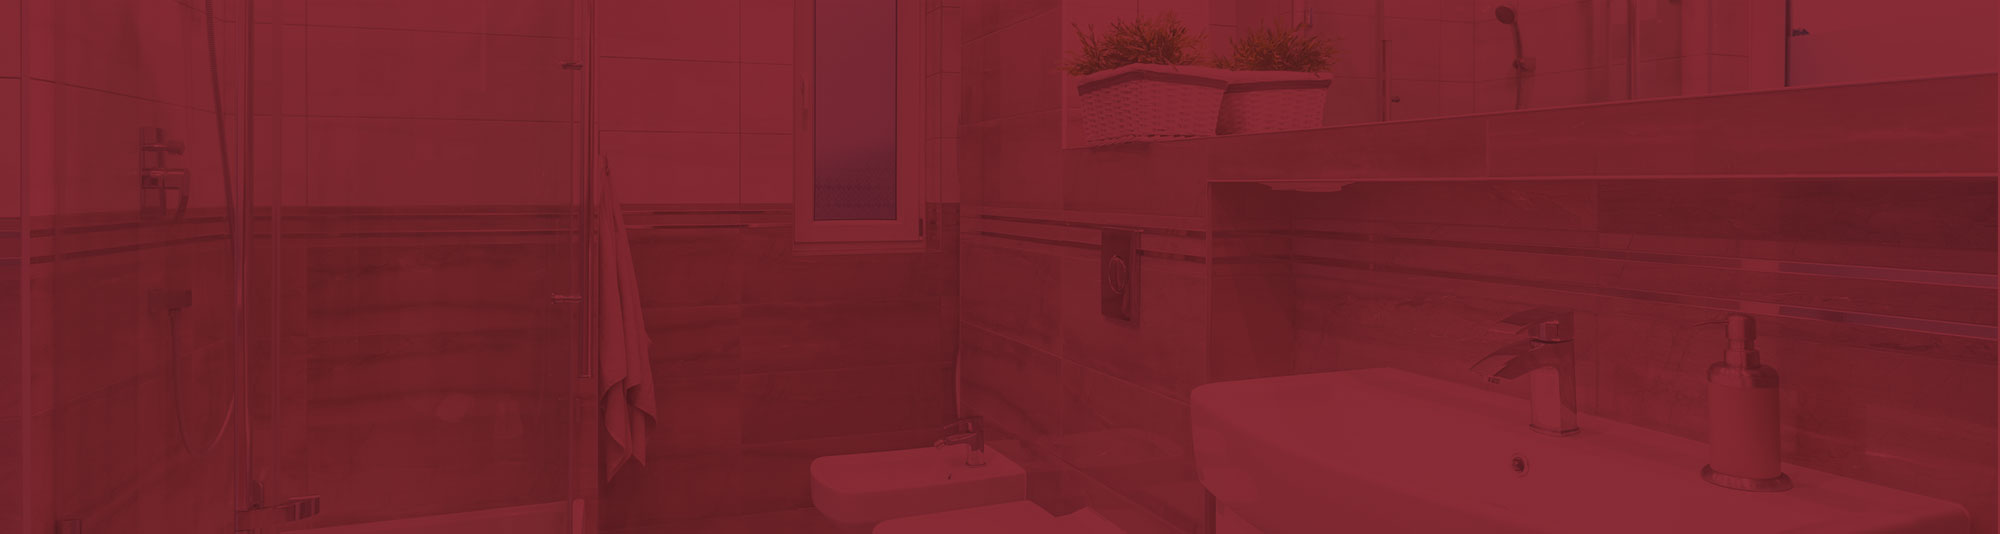 Bathroom with red overlay